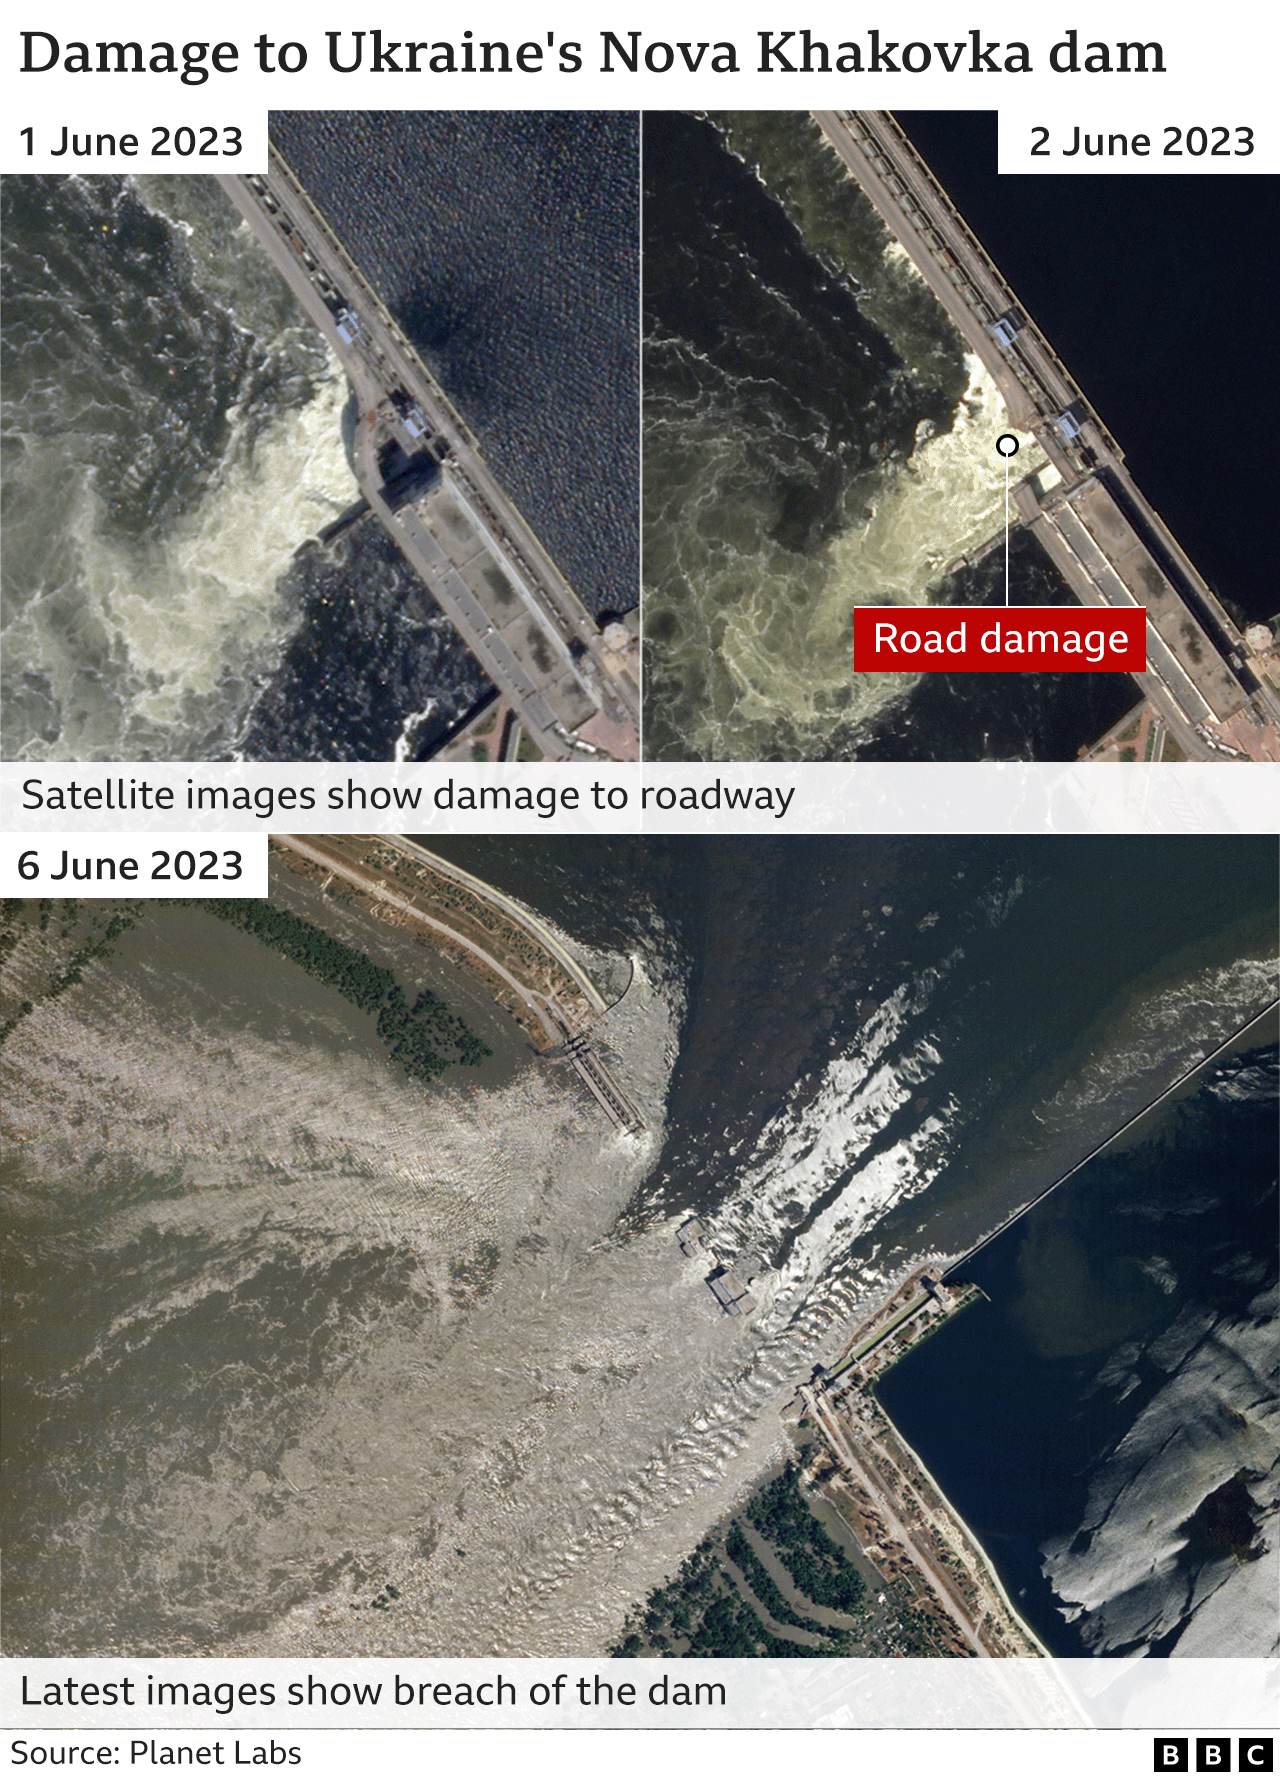 Satellite images showing the damage to the dam on 1 June, 2 June and 6 June